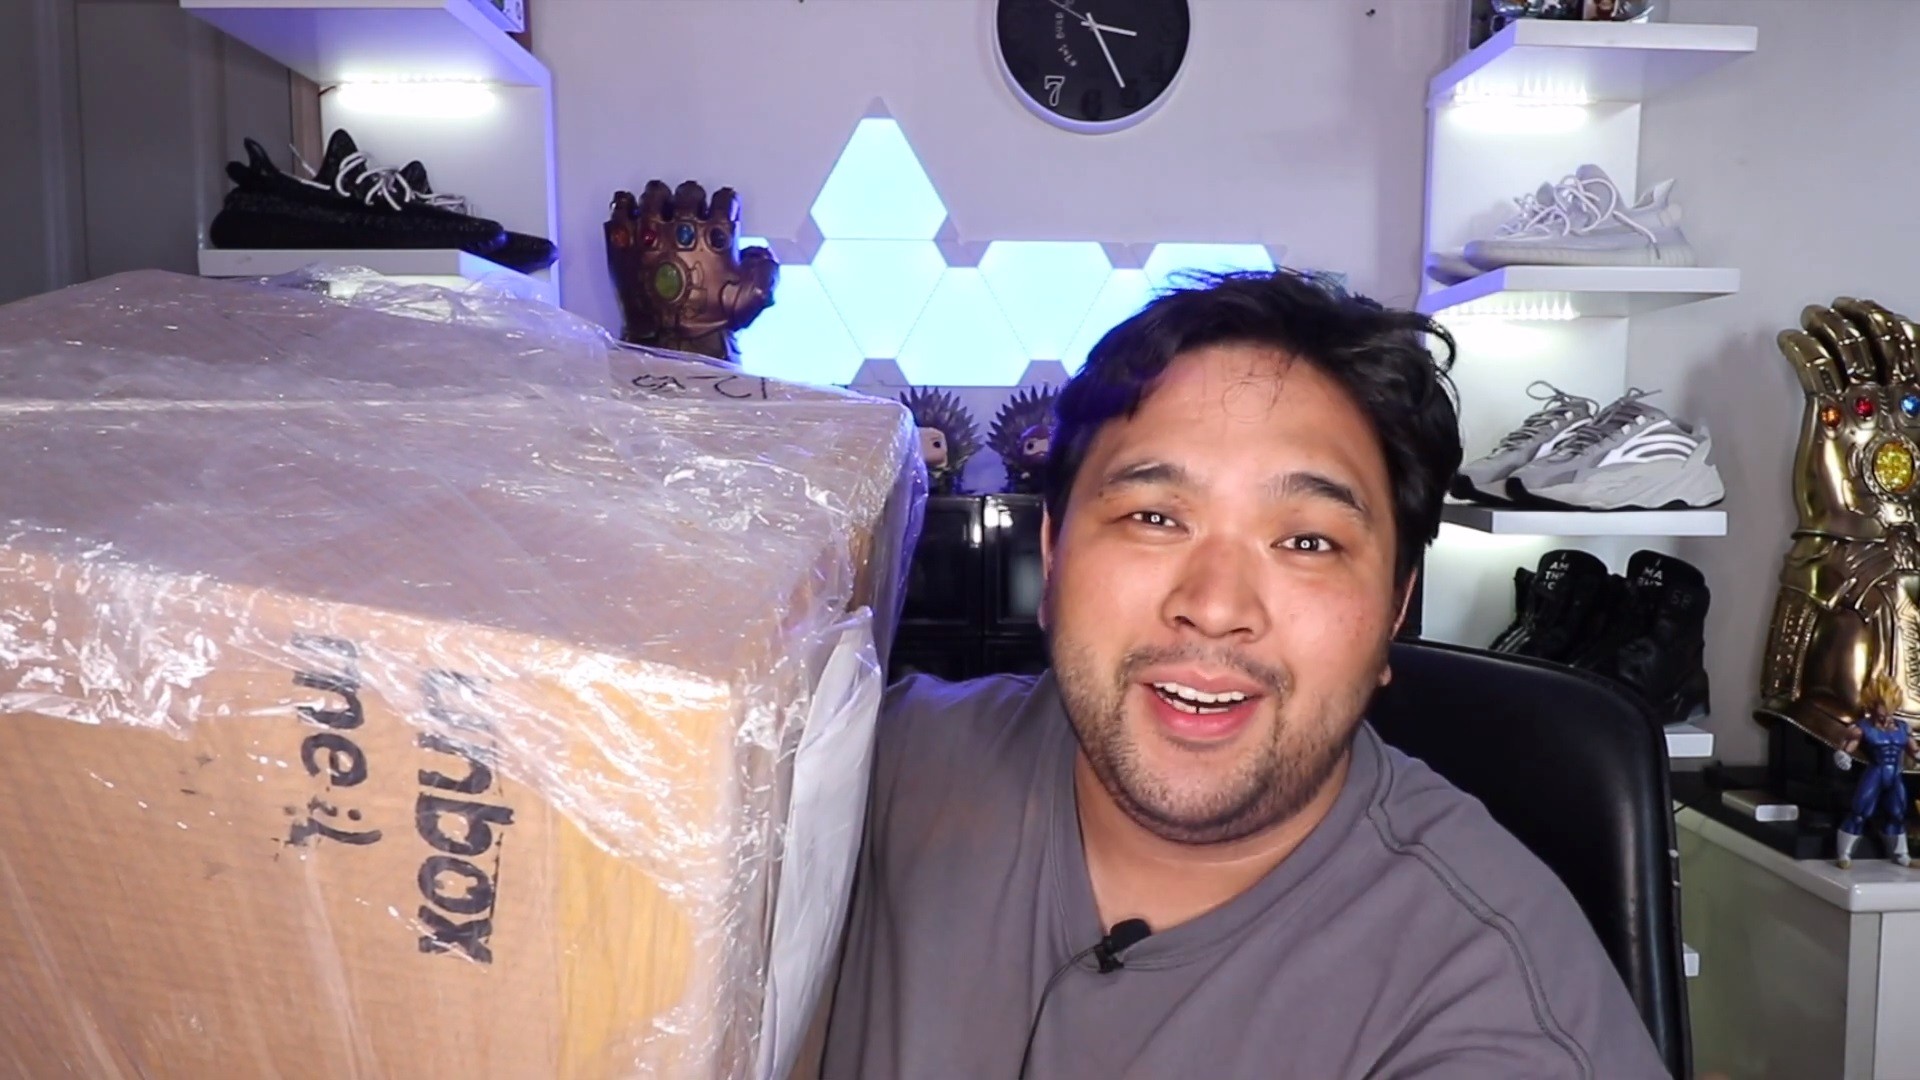 Not an April Fool's Joke: Php 100,000 Gadget Mystery Box Unboxing - UNBOX PH